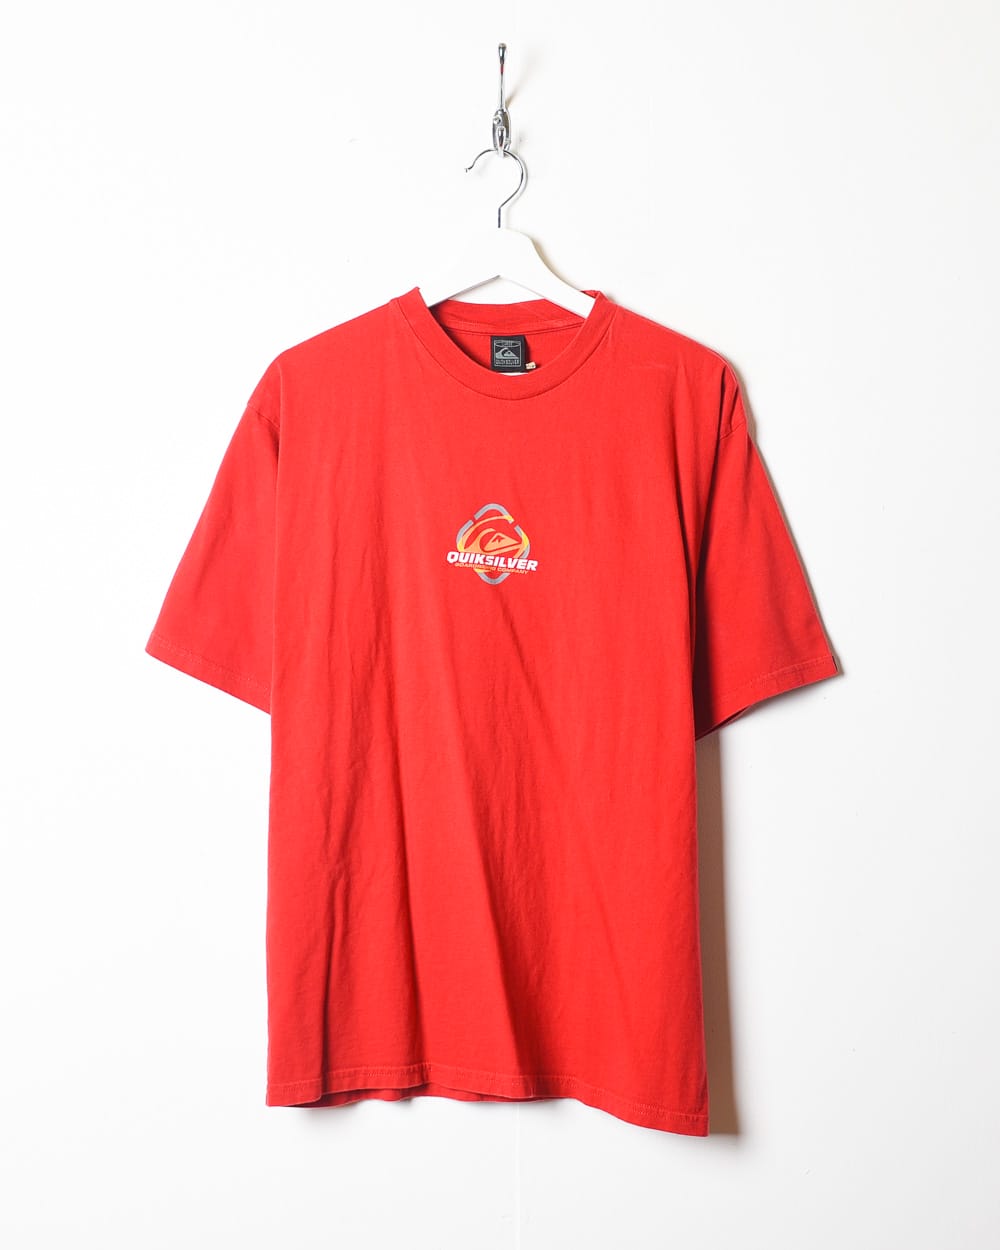 Red Quiksilver T-Shirt - Large